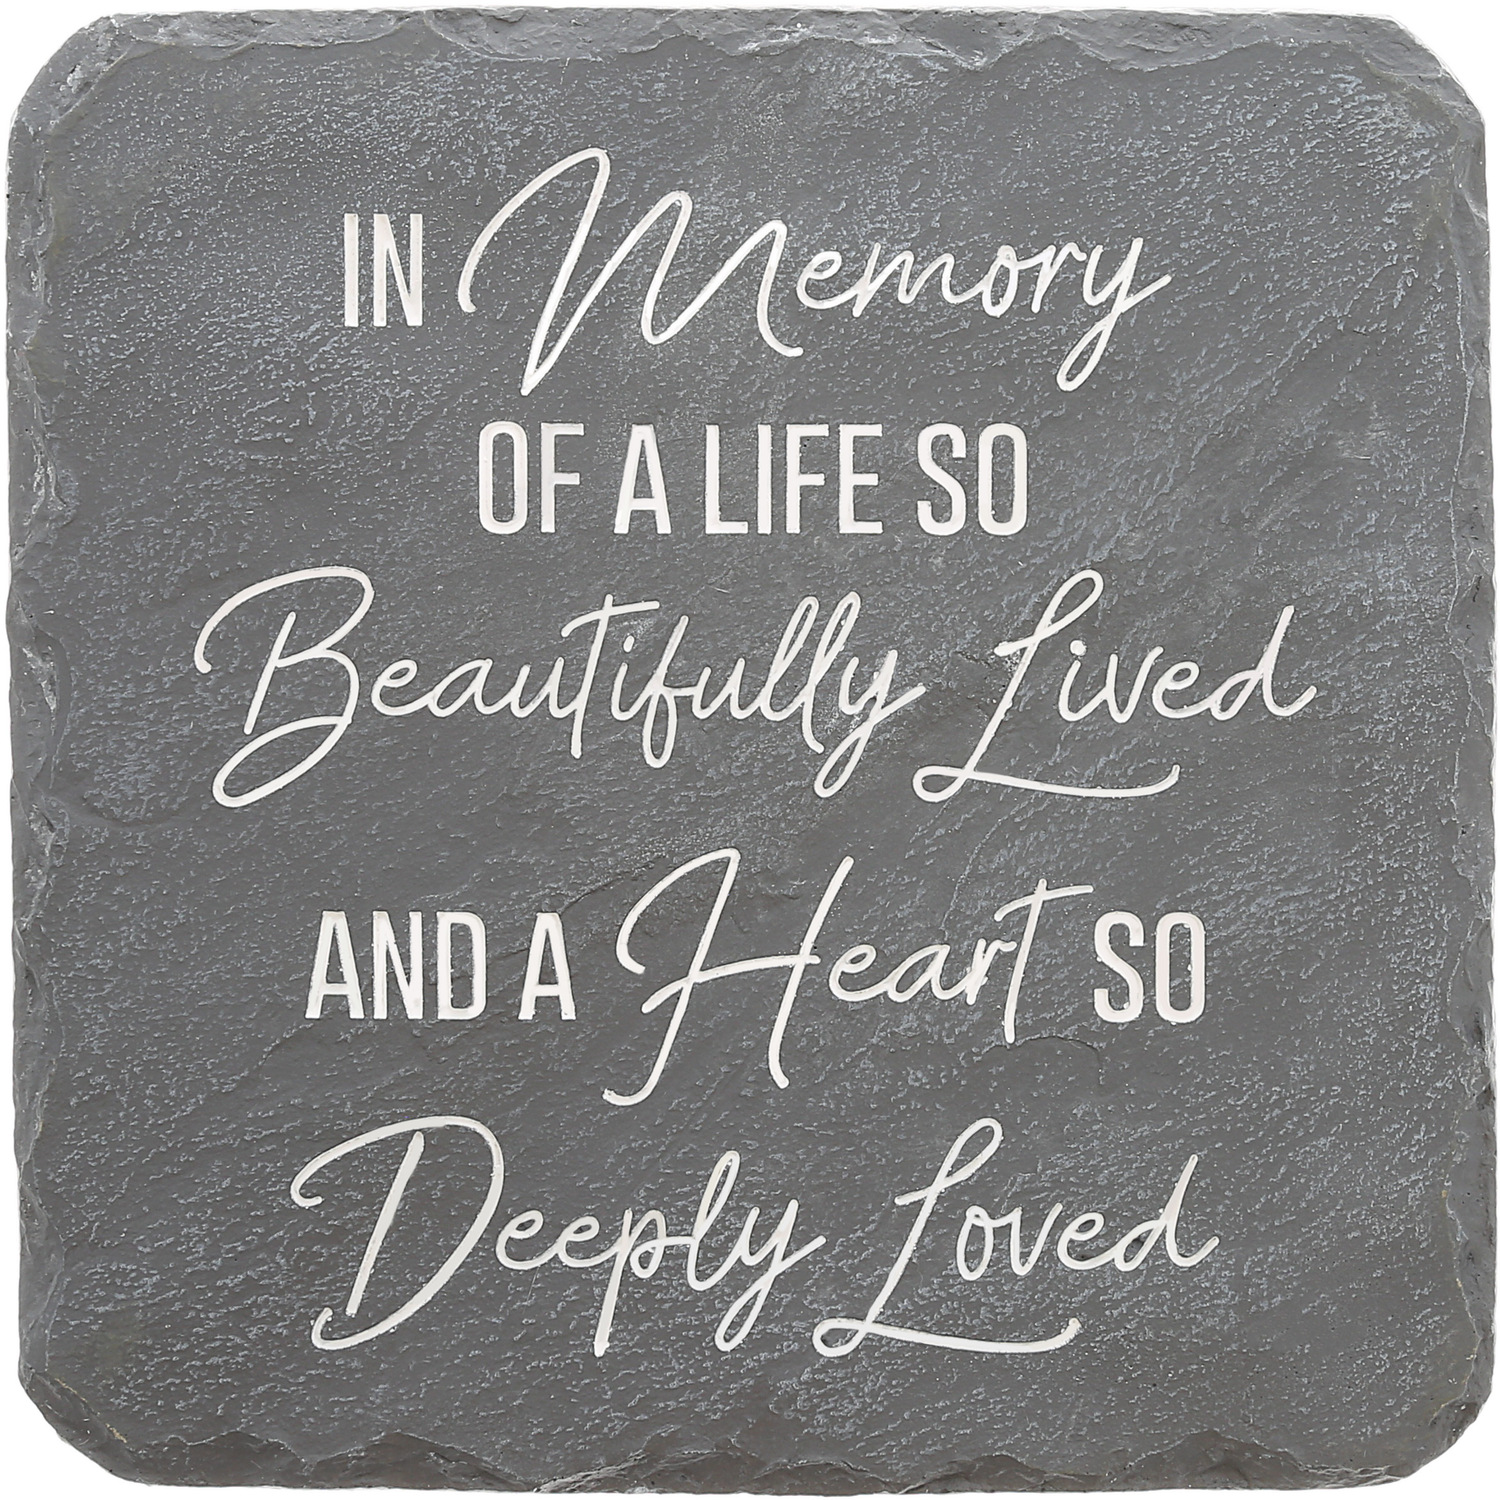 In Memory by Stones with Stories - In Memory - 7.75" x 7.75" Garden Stone